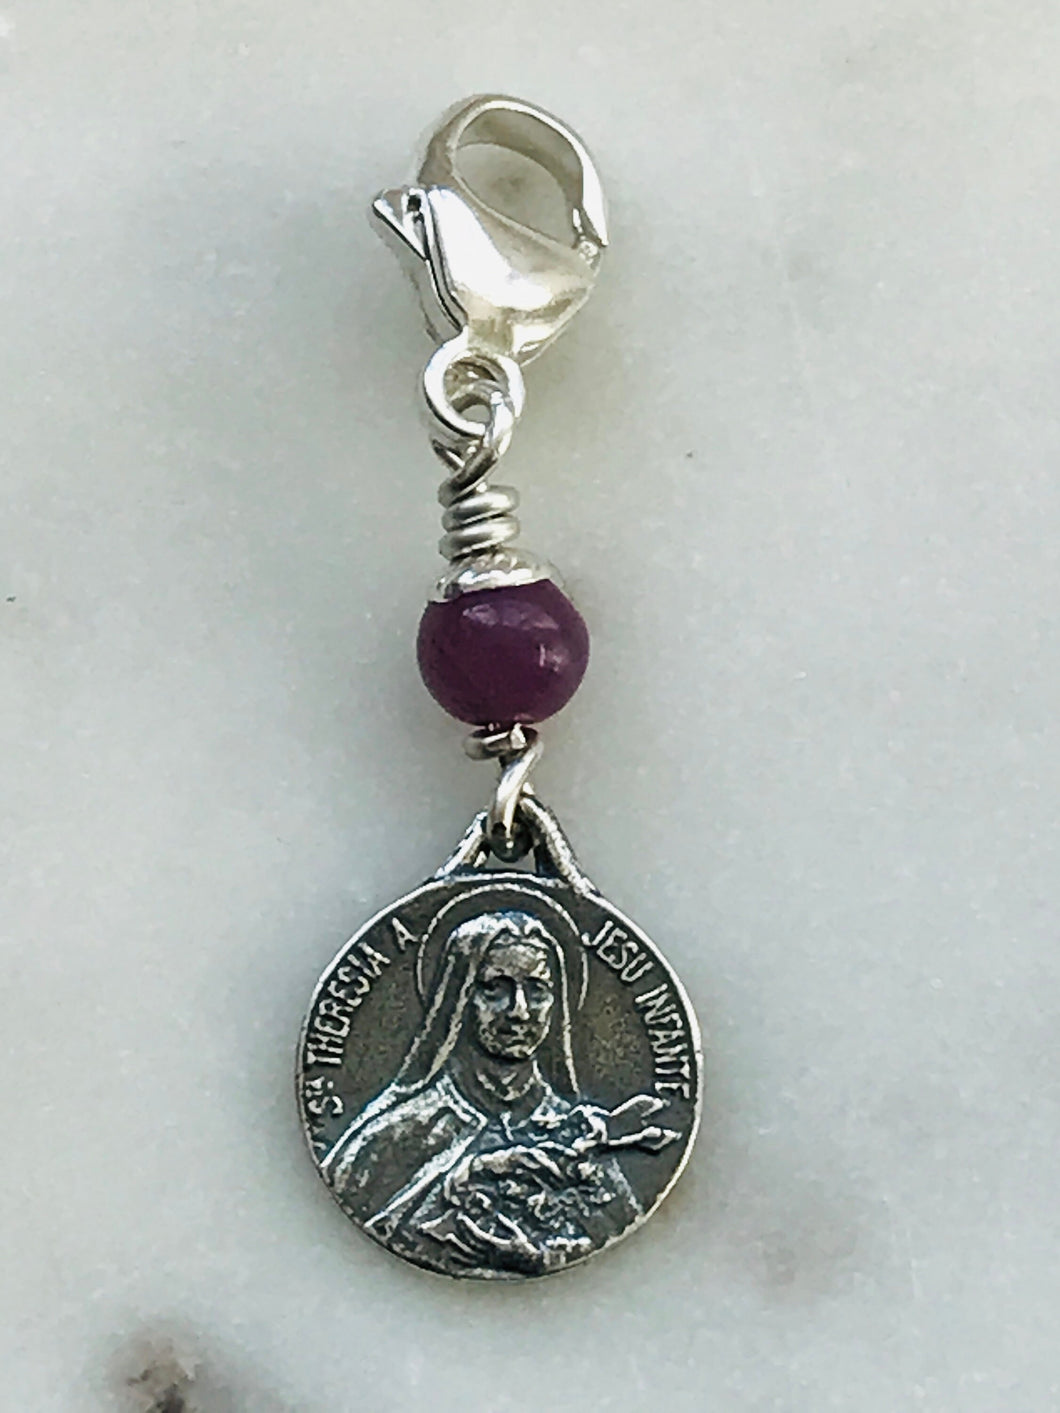 Saint Therese Bag Charm - Zipper Pull - All Sterling Silver CeCeAgnes